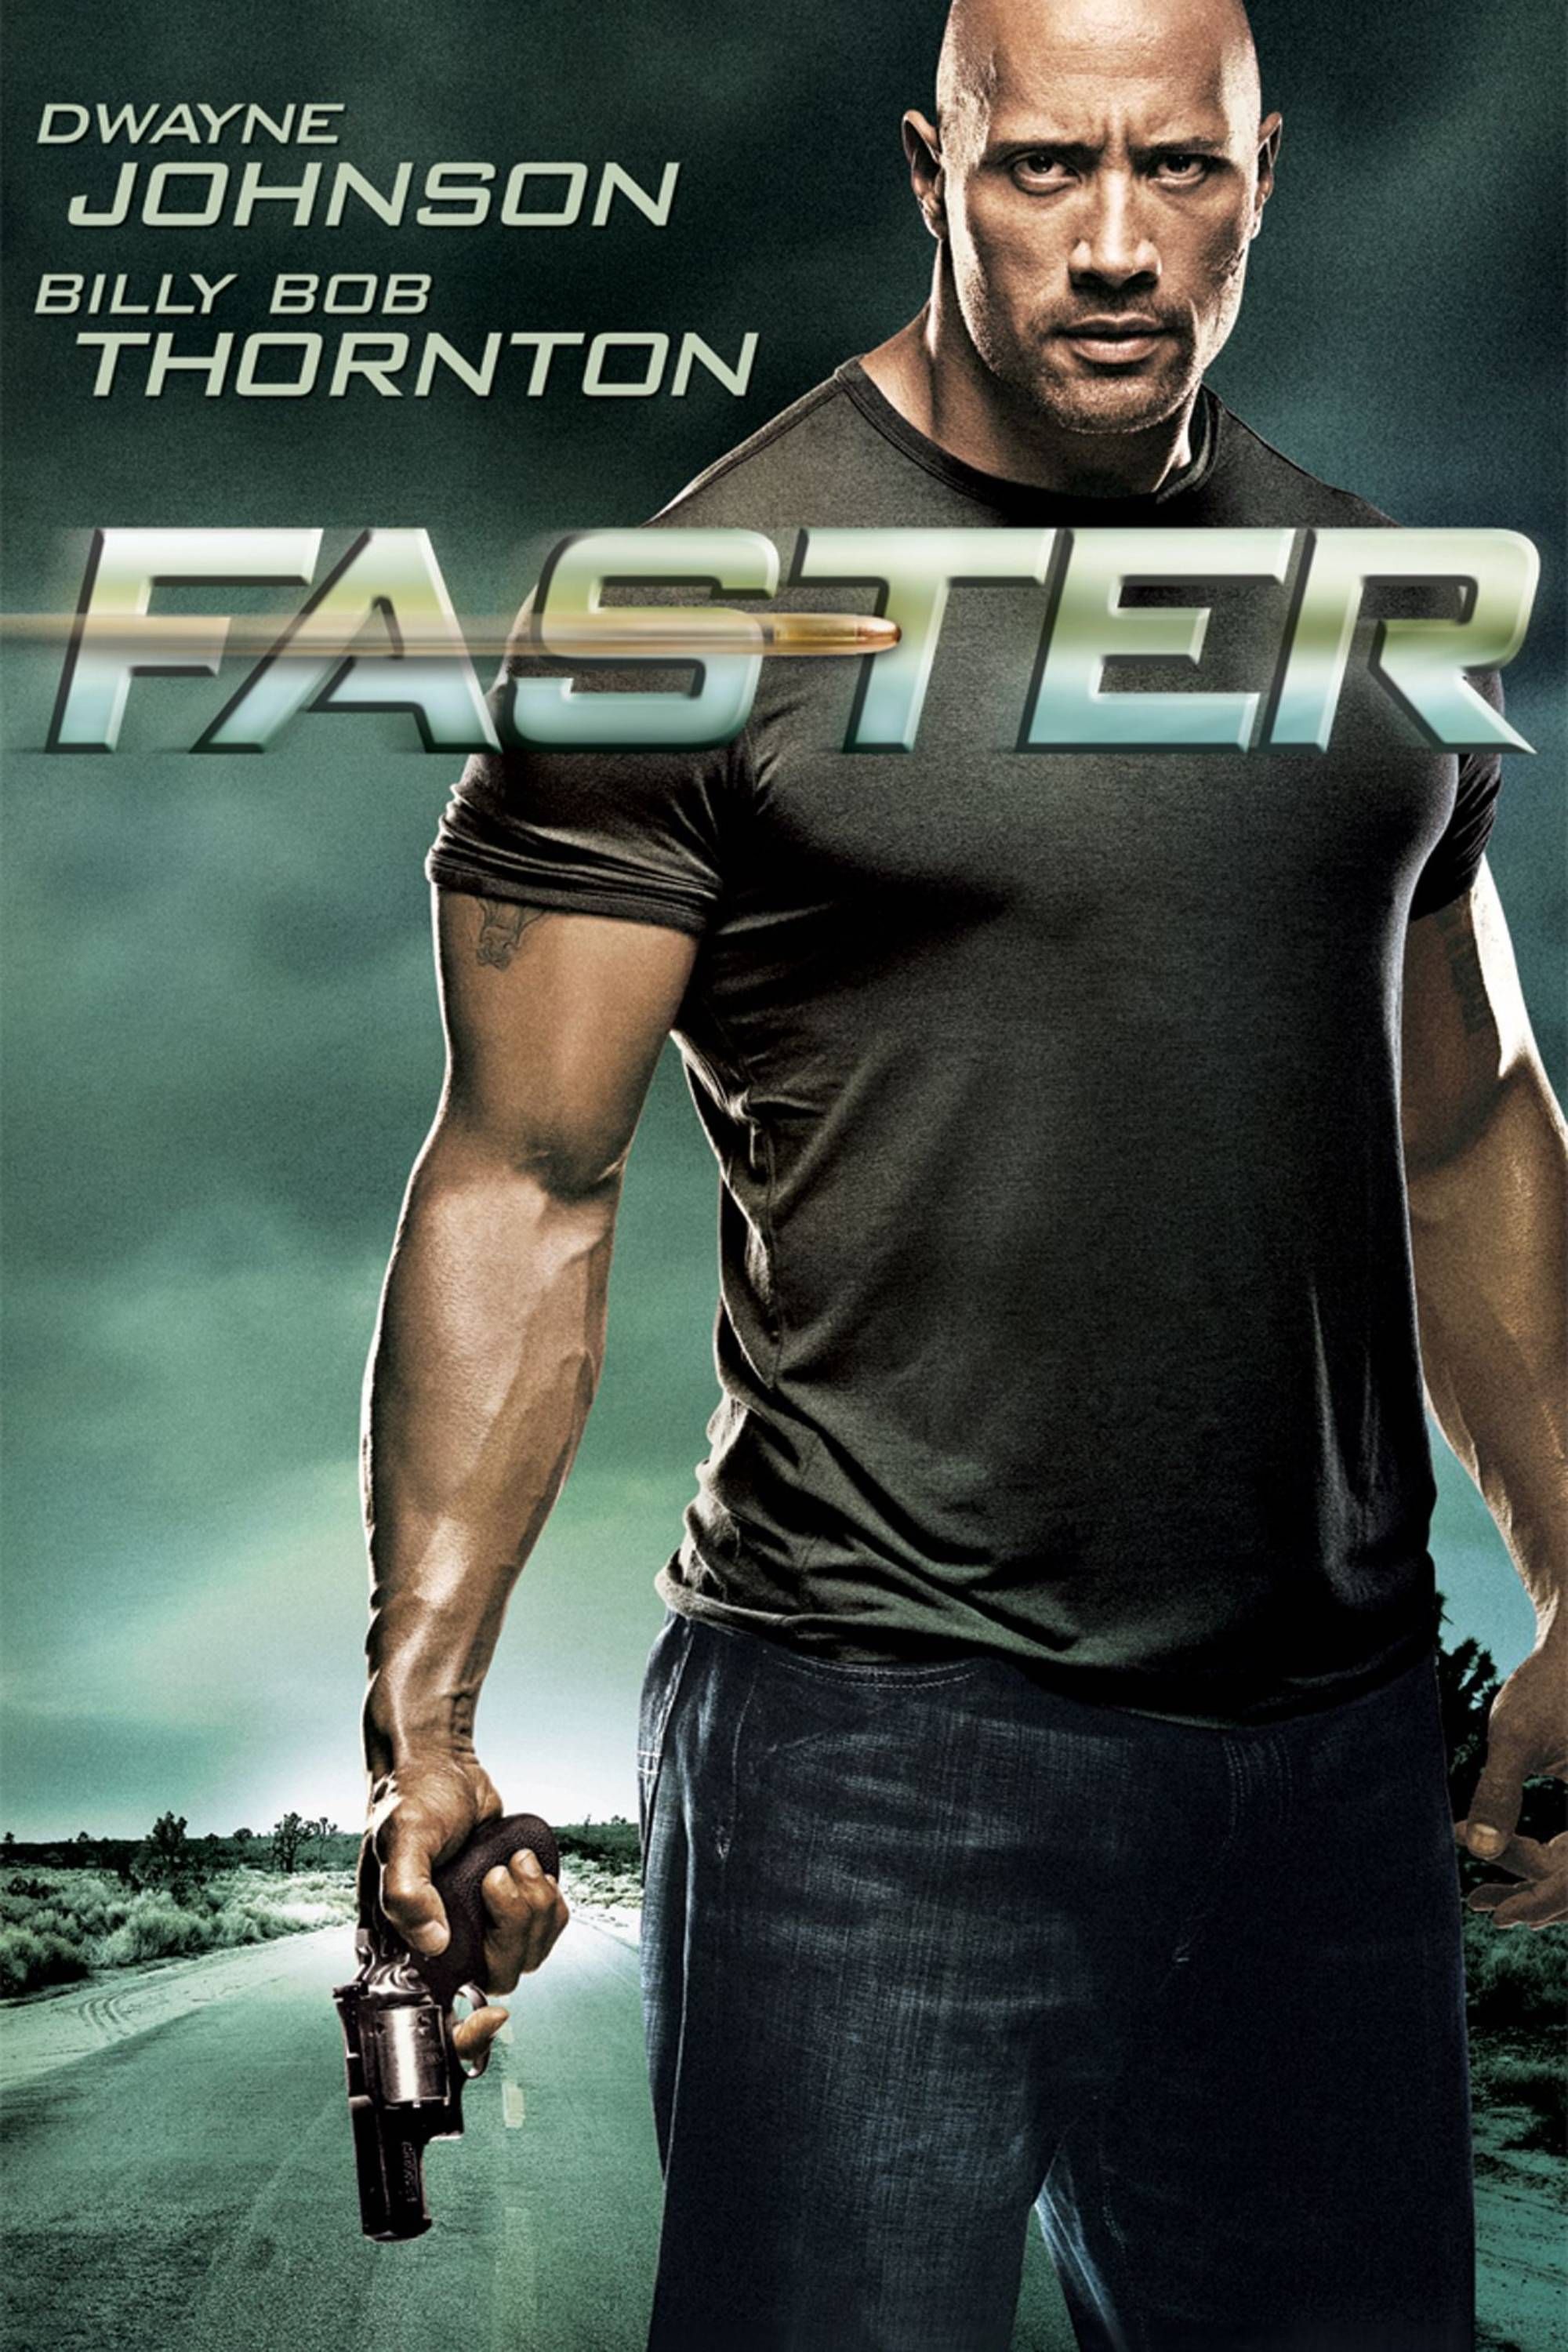 faster